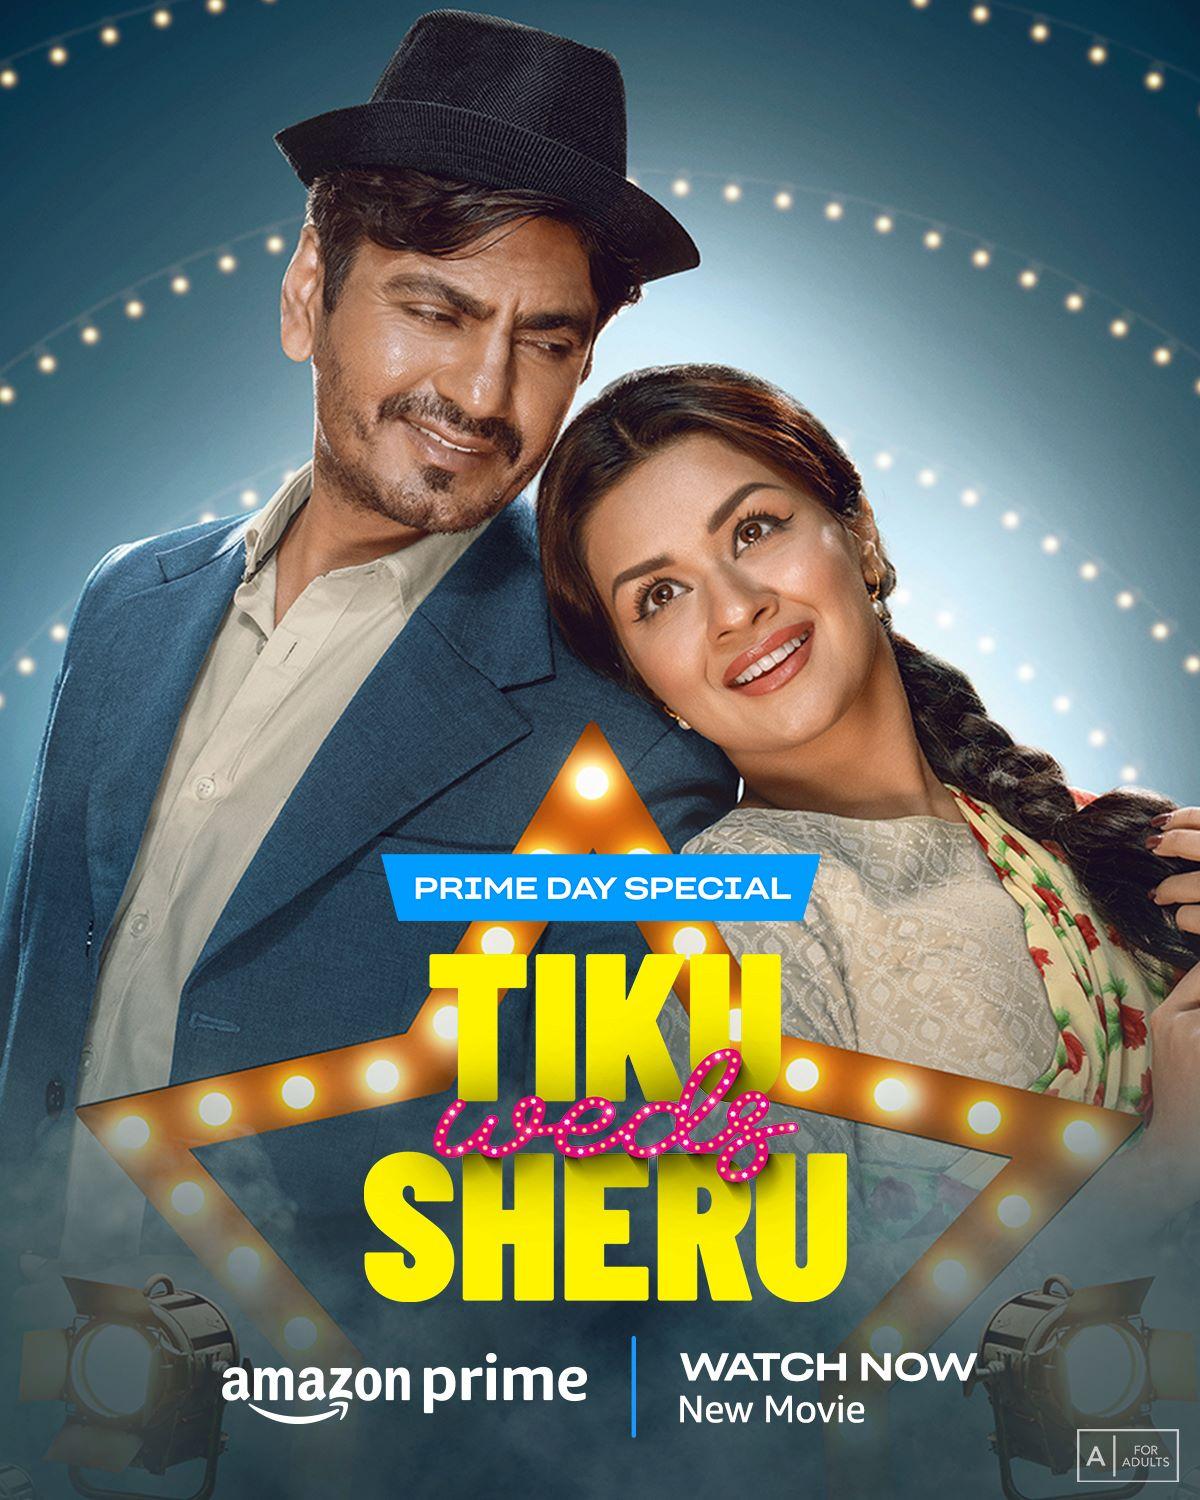 Nawazuddin Siddiqui and Avneet Kaur take us on their quirky journey in ‘Tiku weds Sheru’ Tune into Amazon Prime to experience their amusing journey